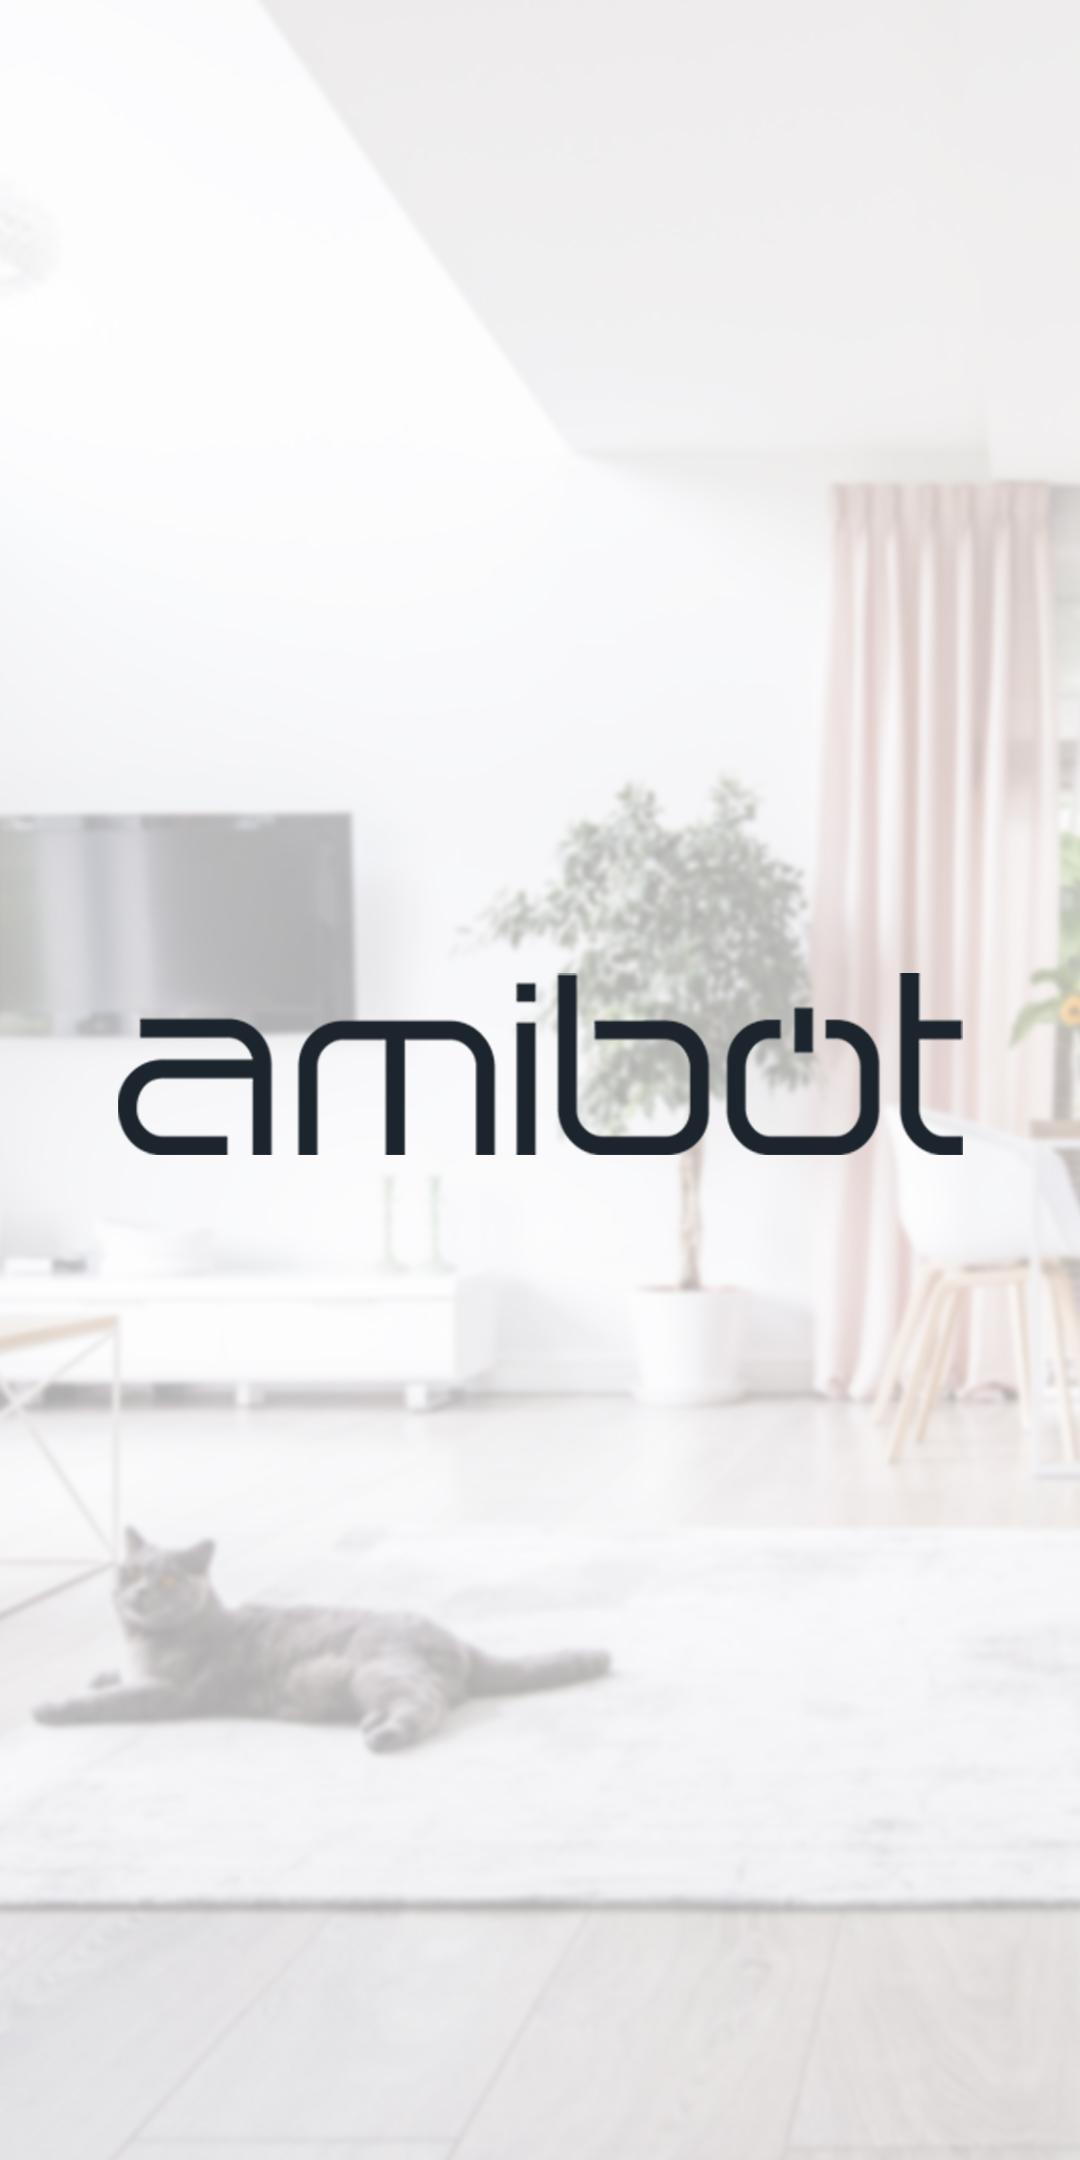 AMIBOT Home for Android - APK Download